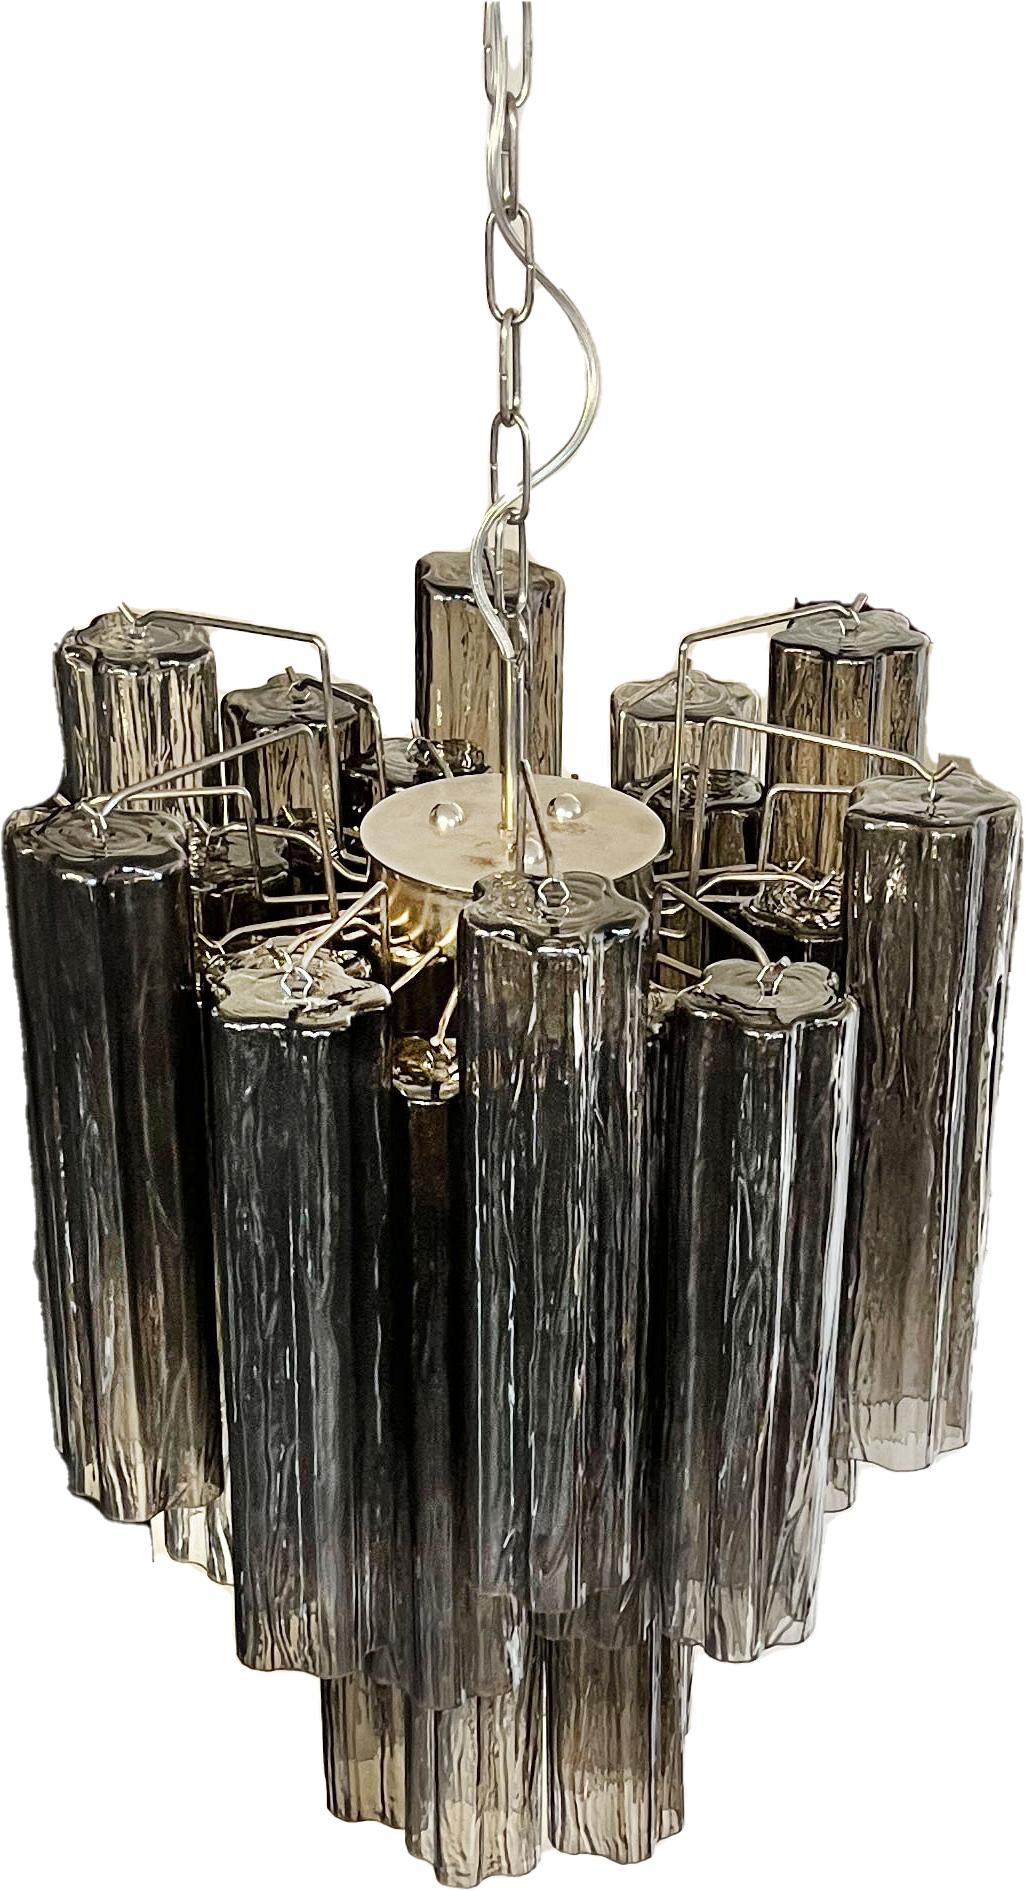 Italian vintage chandeliers in Murano glass and nickel-plated metal structure. The armor polished nickel supports 30 largesmoked glass tubes.
Period: Late 20th century
Dimensions: 47.25 inches (120 cm) height with chain; 24.80 inches (63 cm)